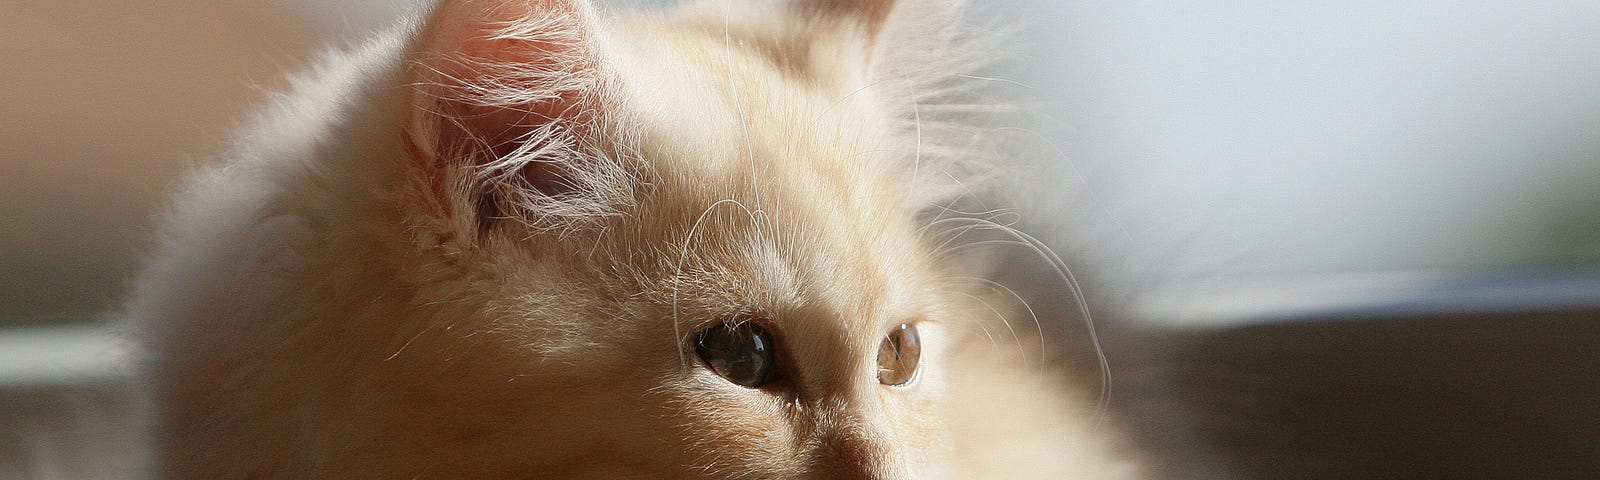 A fluffy white cat stares to the right of the camera, looking somber and serious.